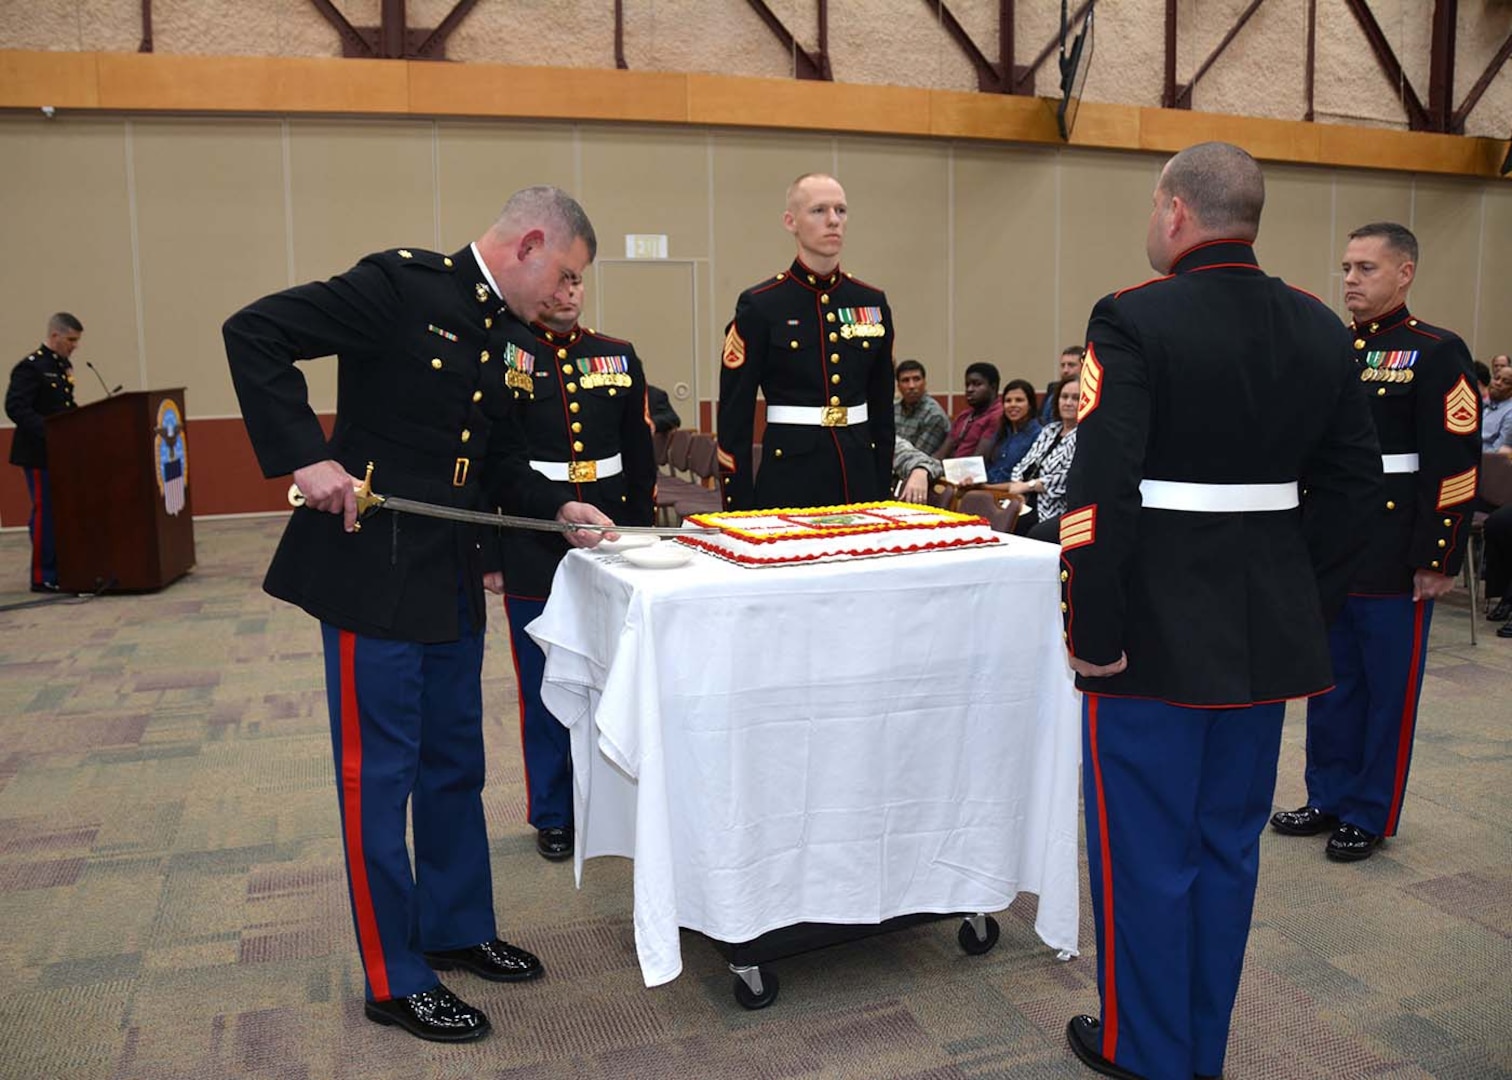 Marine Corps Maj. Chris Story cuts the first slice of cake Nov. 10. 2015 during Defense Logistics Agency Aviation’s ceremony celebrating the 240th birthday of the U.S. Marine Corps in the Frank B. Lotts Conference Center on Defense Supply Center Richmond, Virginia.  